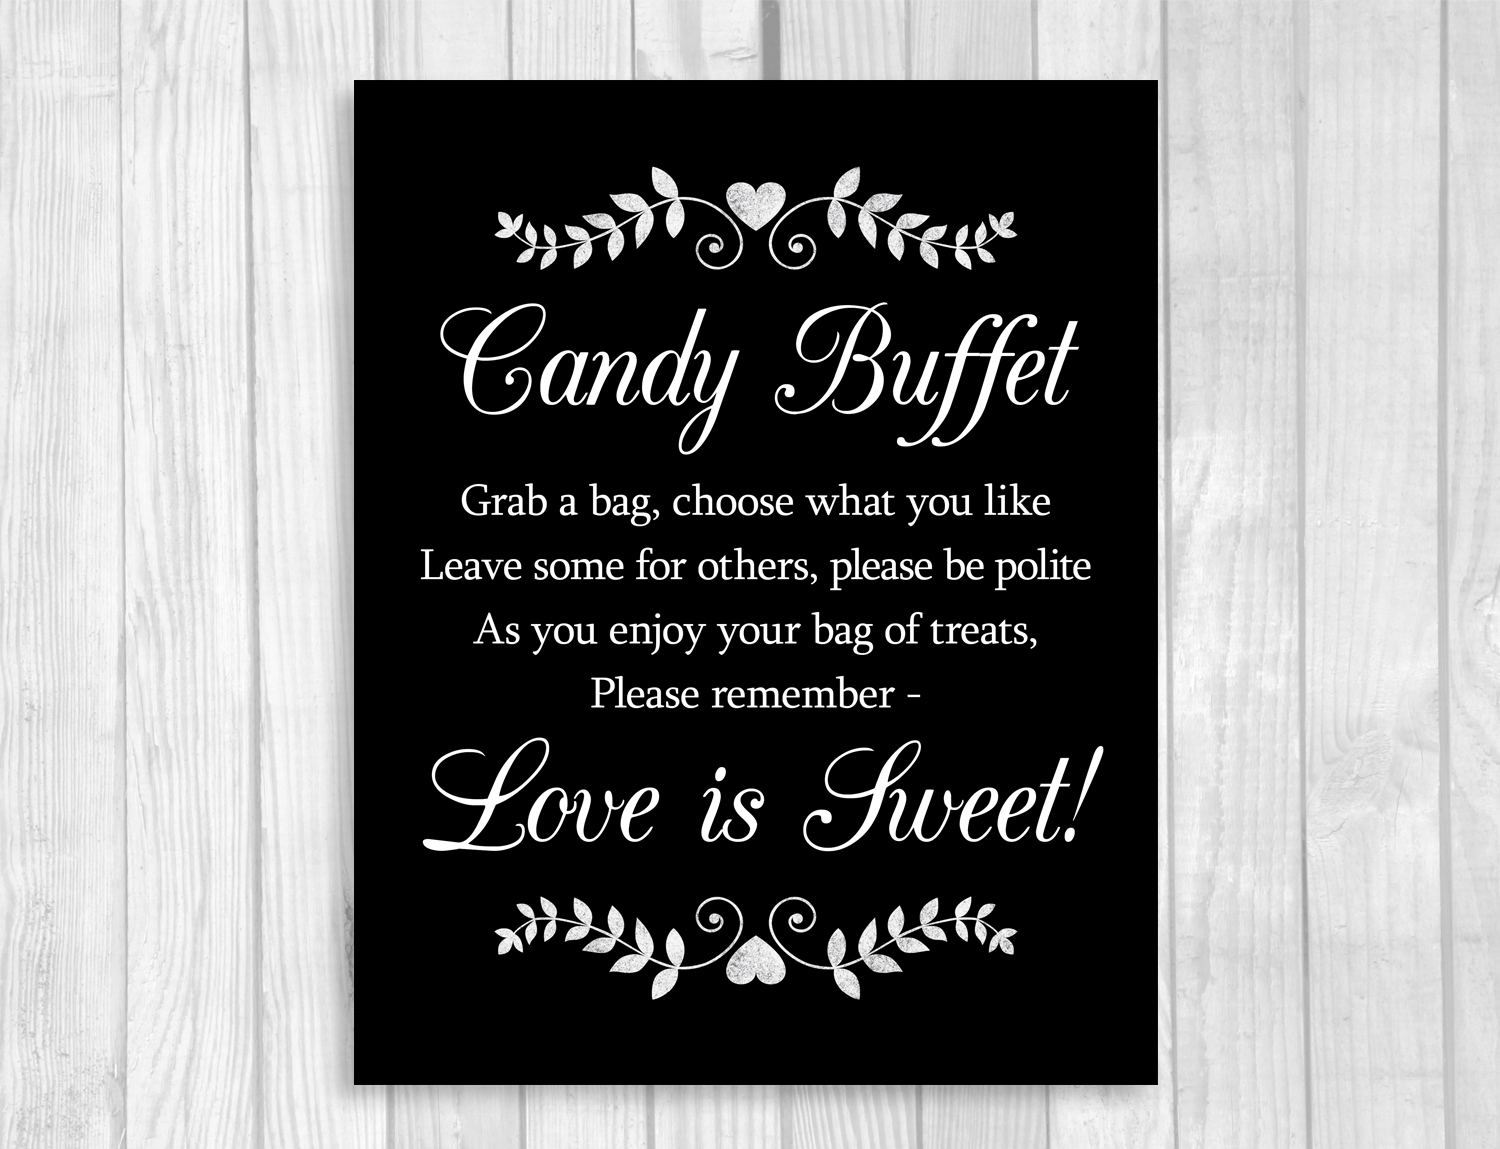 black-and-white-wedding-signs-with-hearts-and-laurels-from-weddings-by-susan